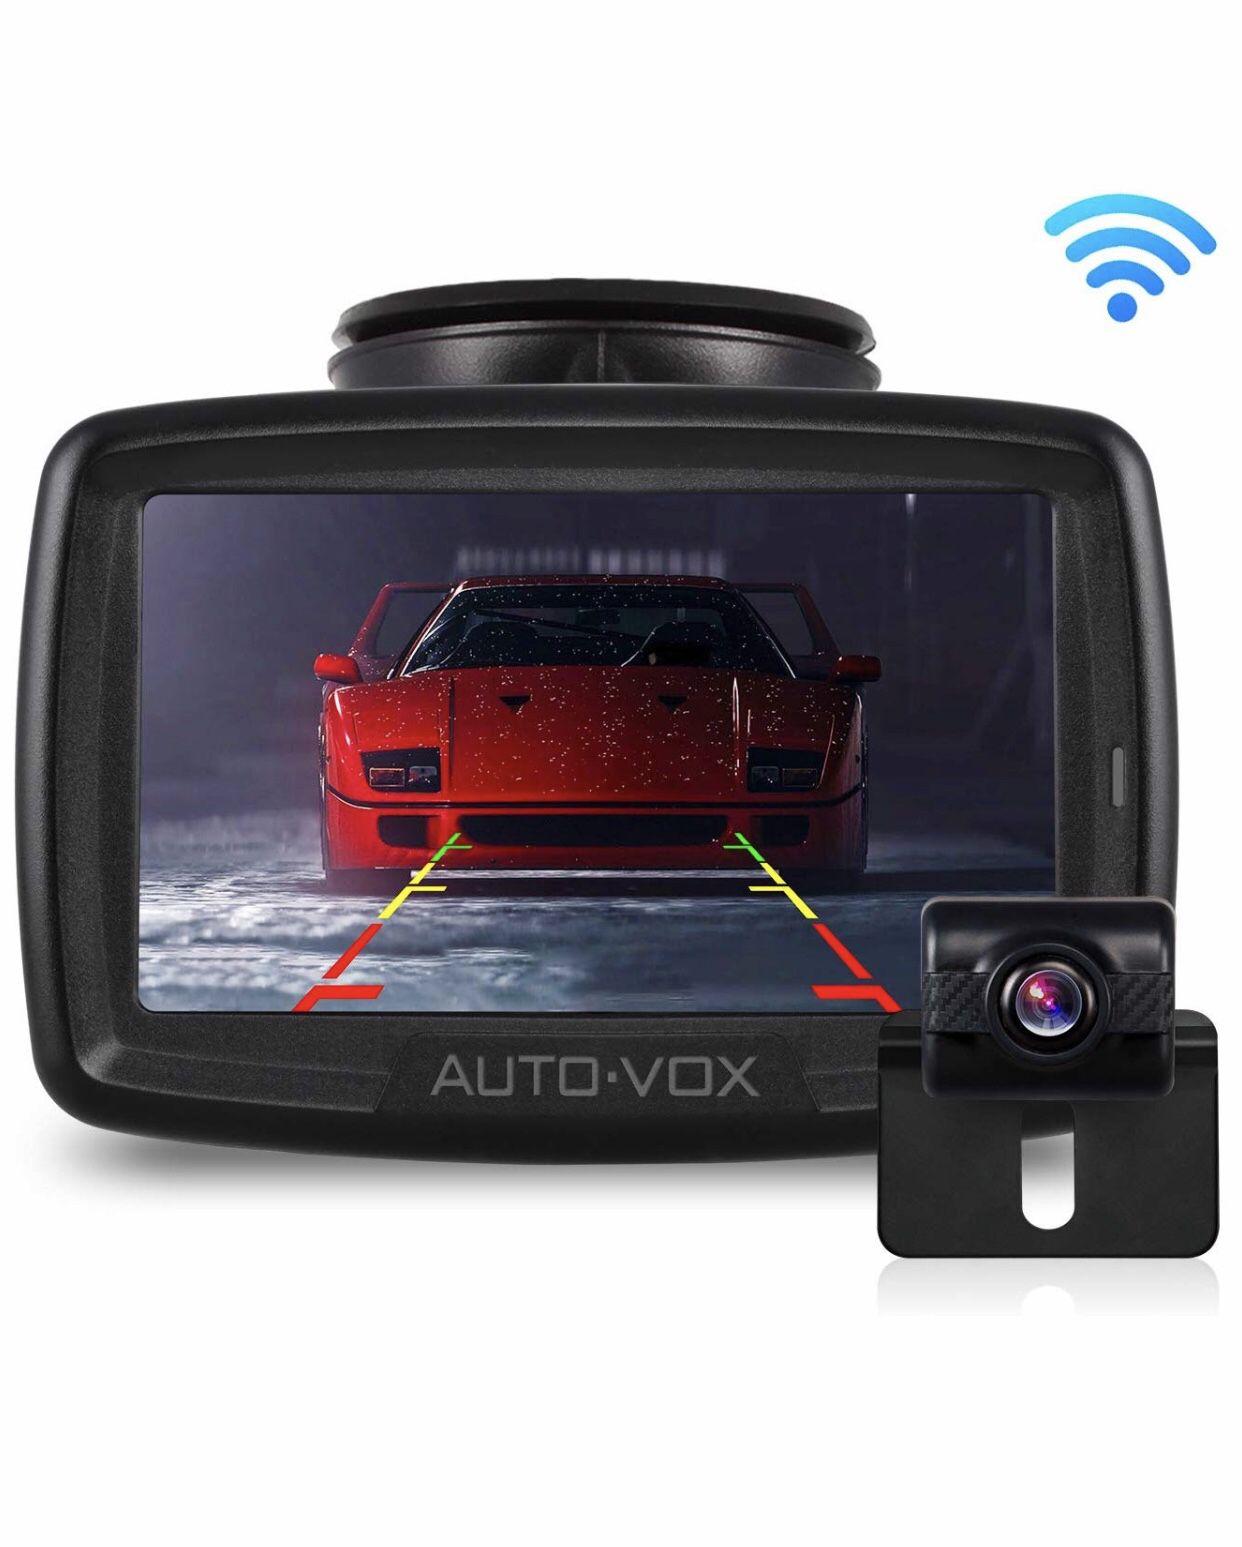 W2 NO Interference Digital Wireless Backup Camera System Kit with Built-in Transmitter, IP68 Waterproof Wireless Rear View Camera and 4.3’LCD Wireles